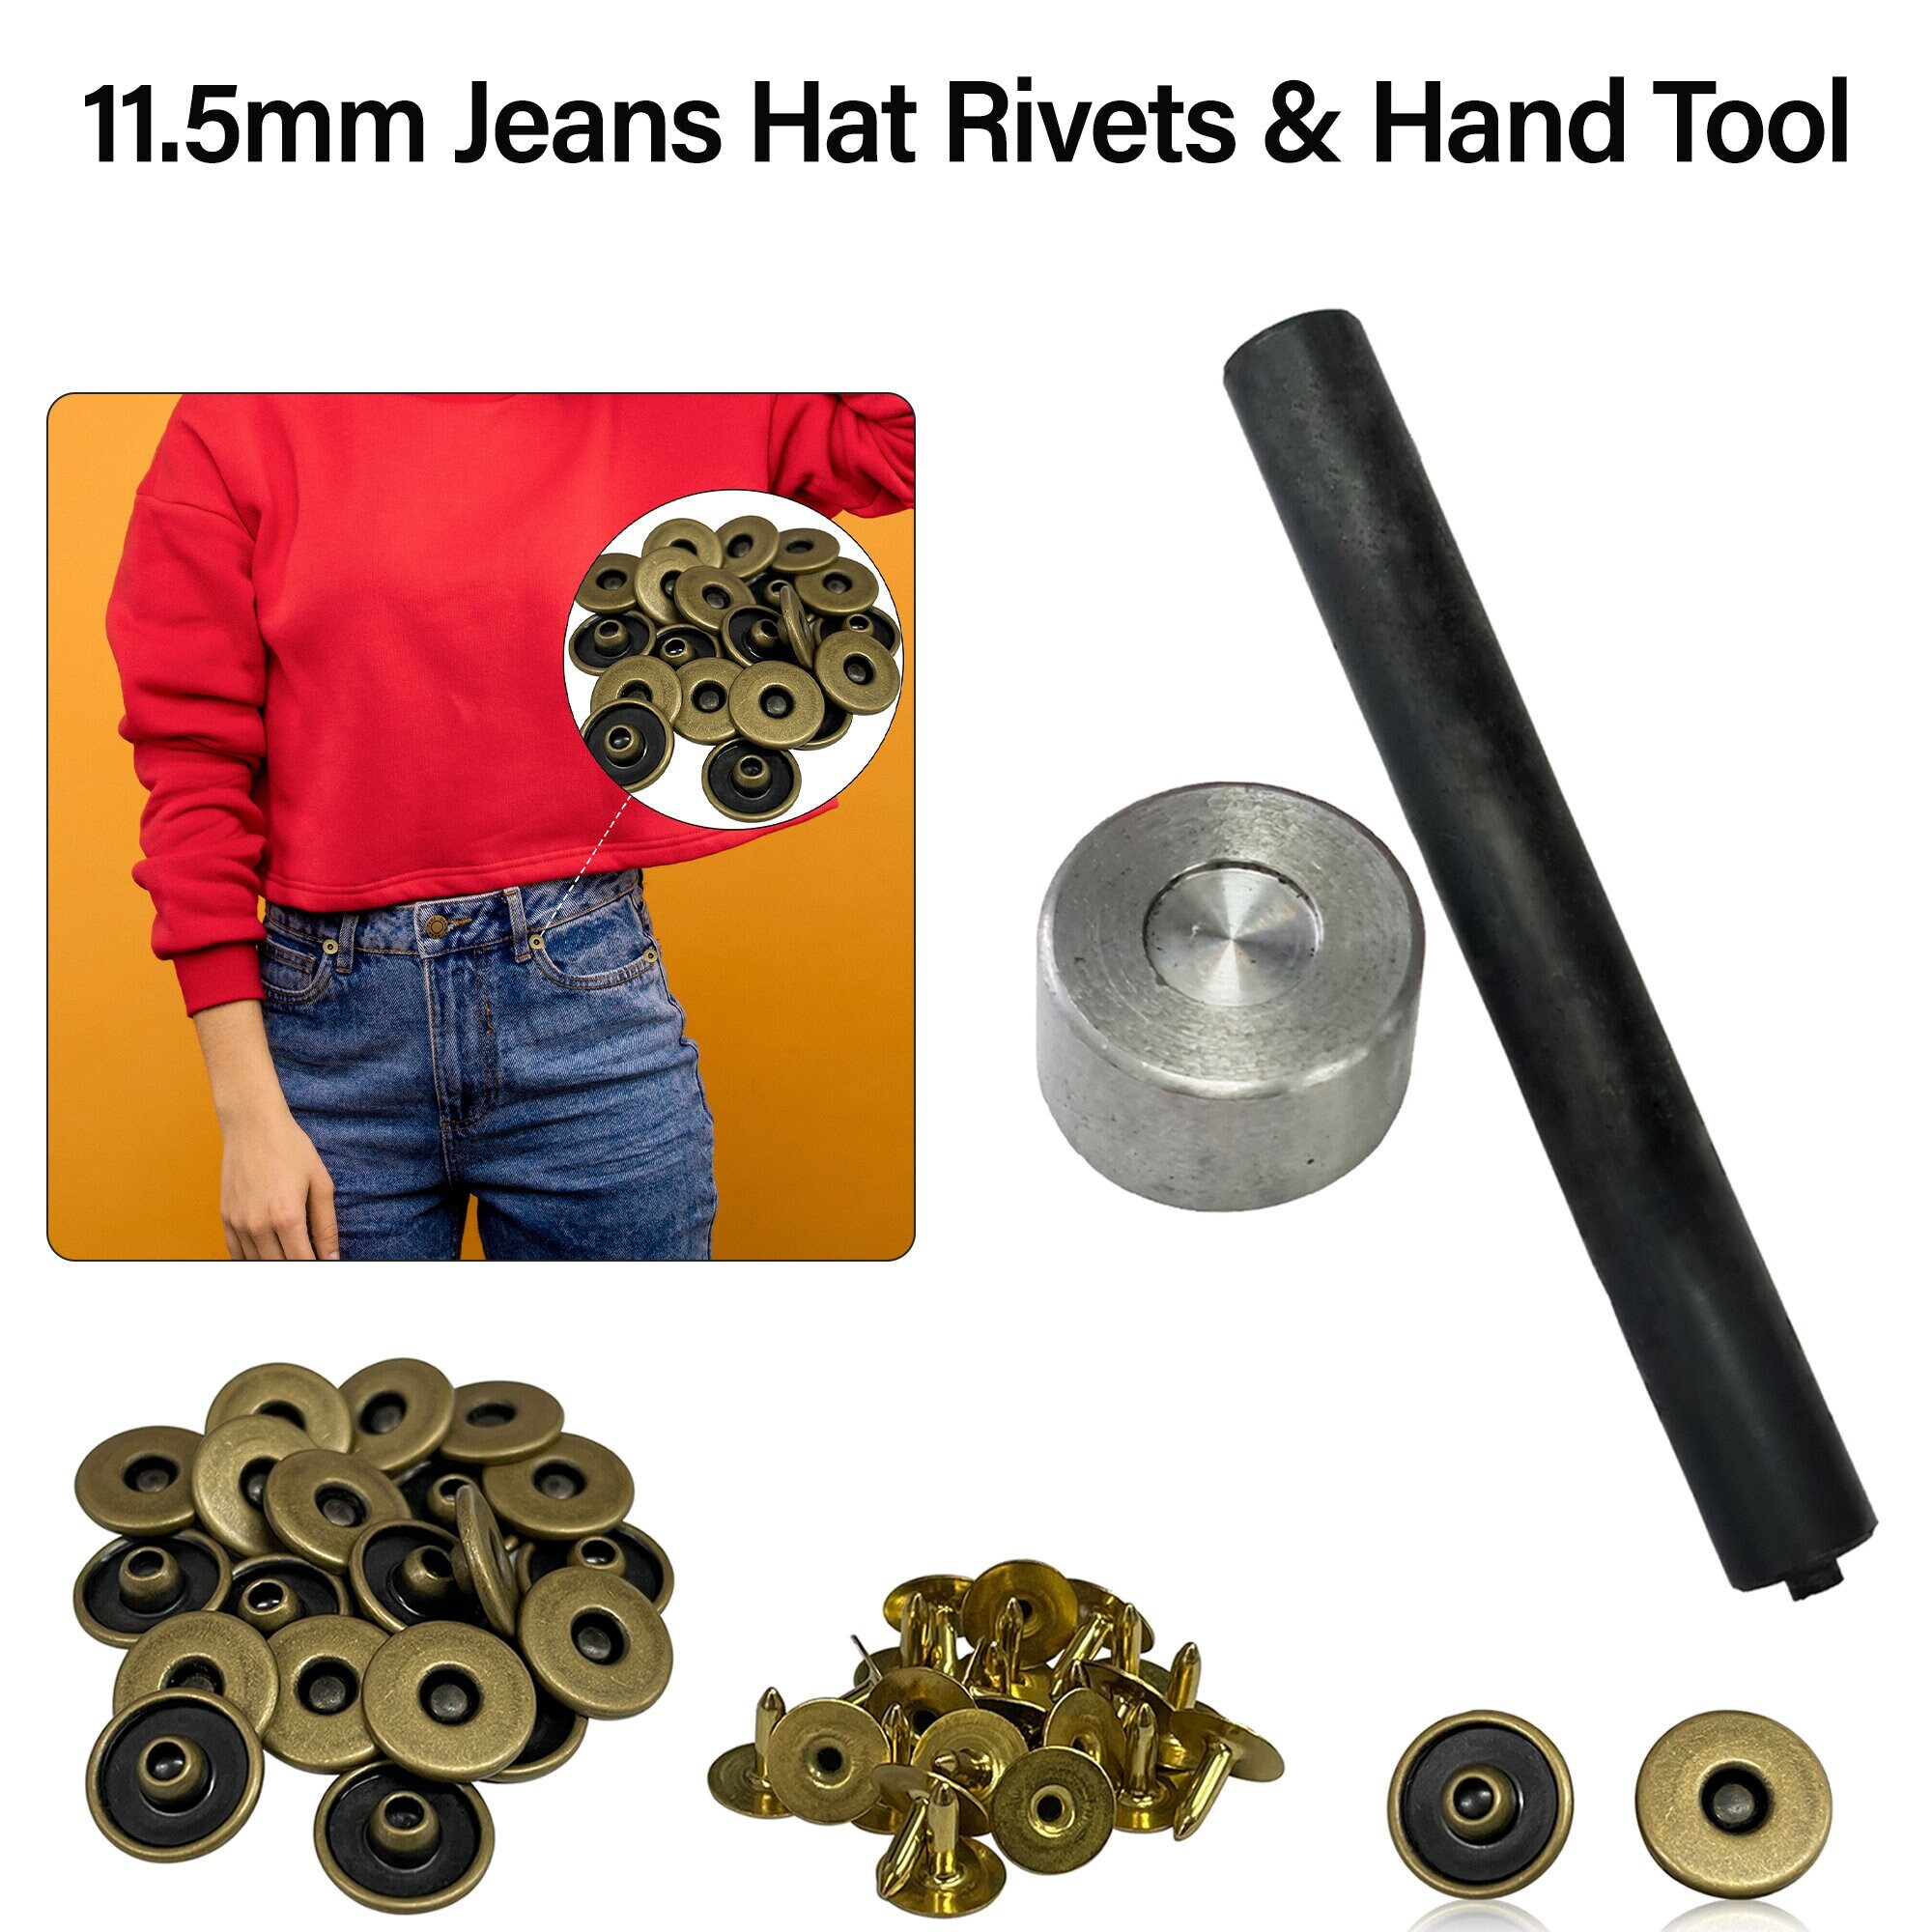 7mm Jeans Hat Rivets Hand Tool, for Fabric Application, Denim, Clothing  Repair, Designing & Leathercraft, Replacement of Old Rivets 